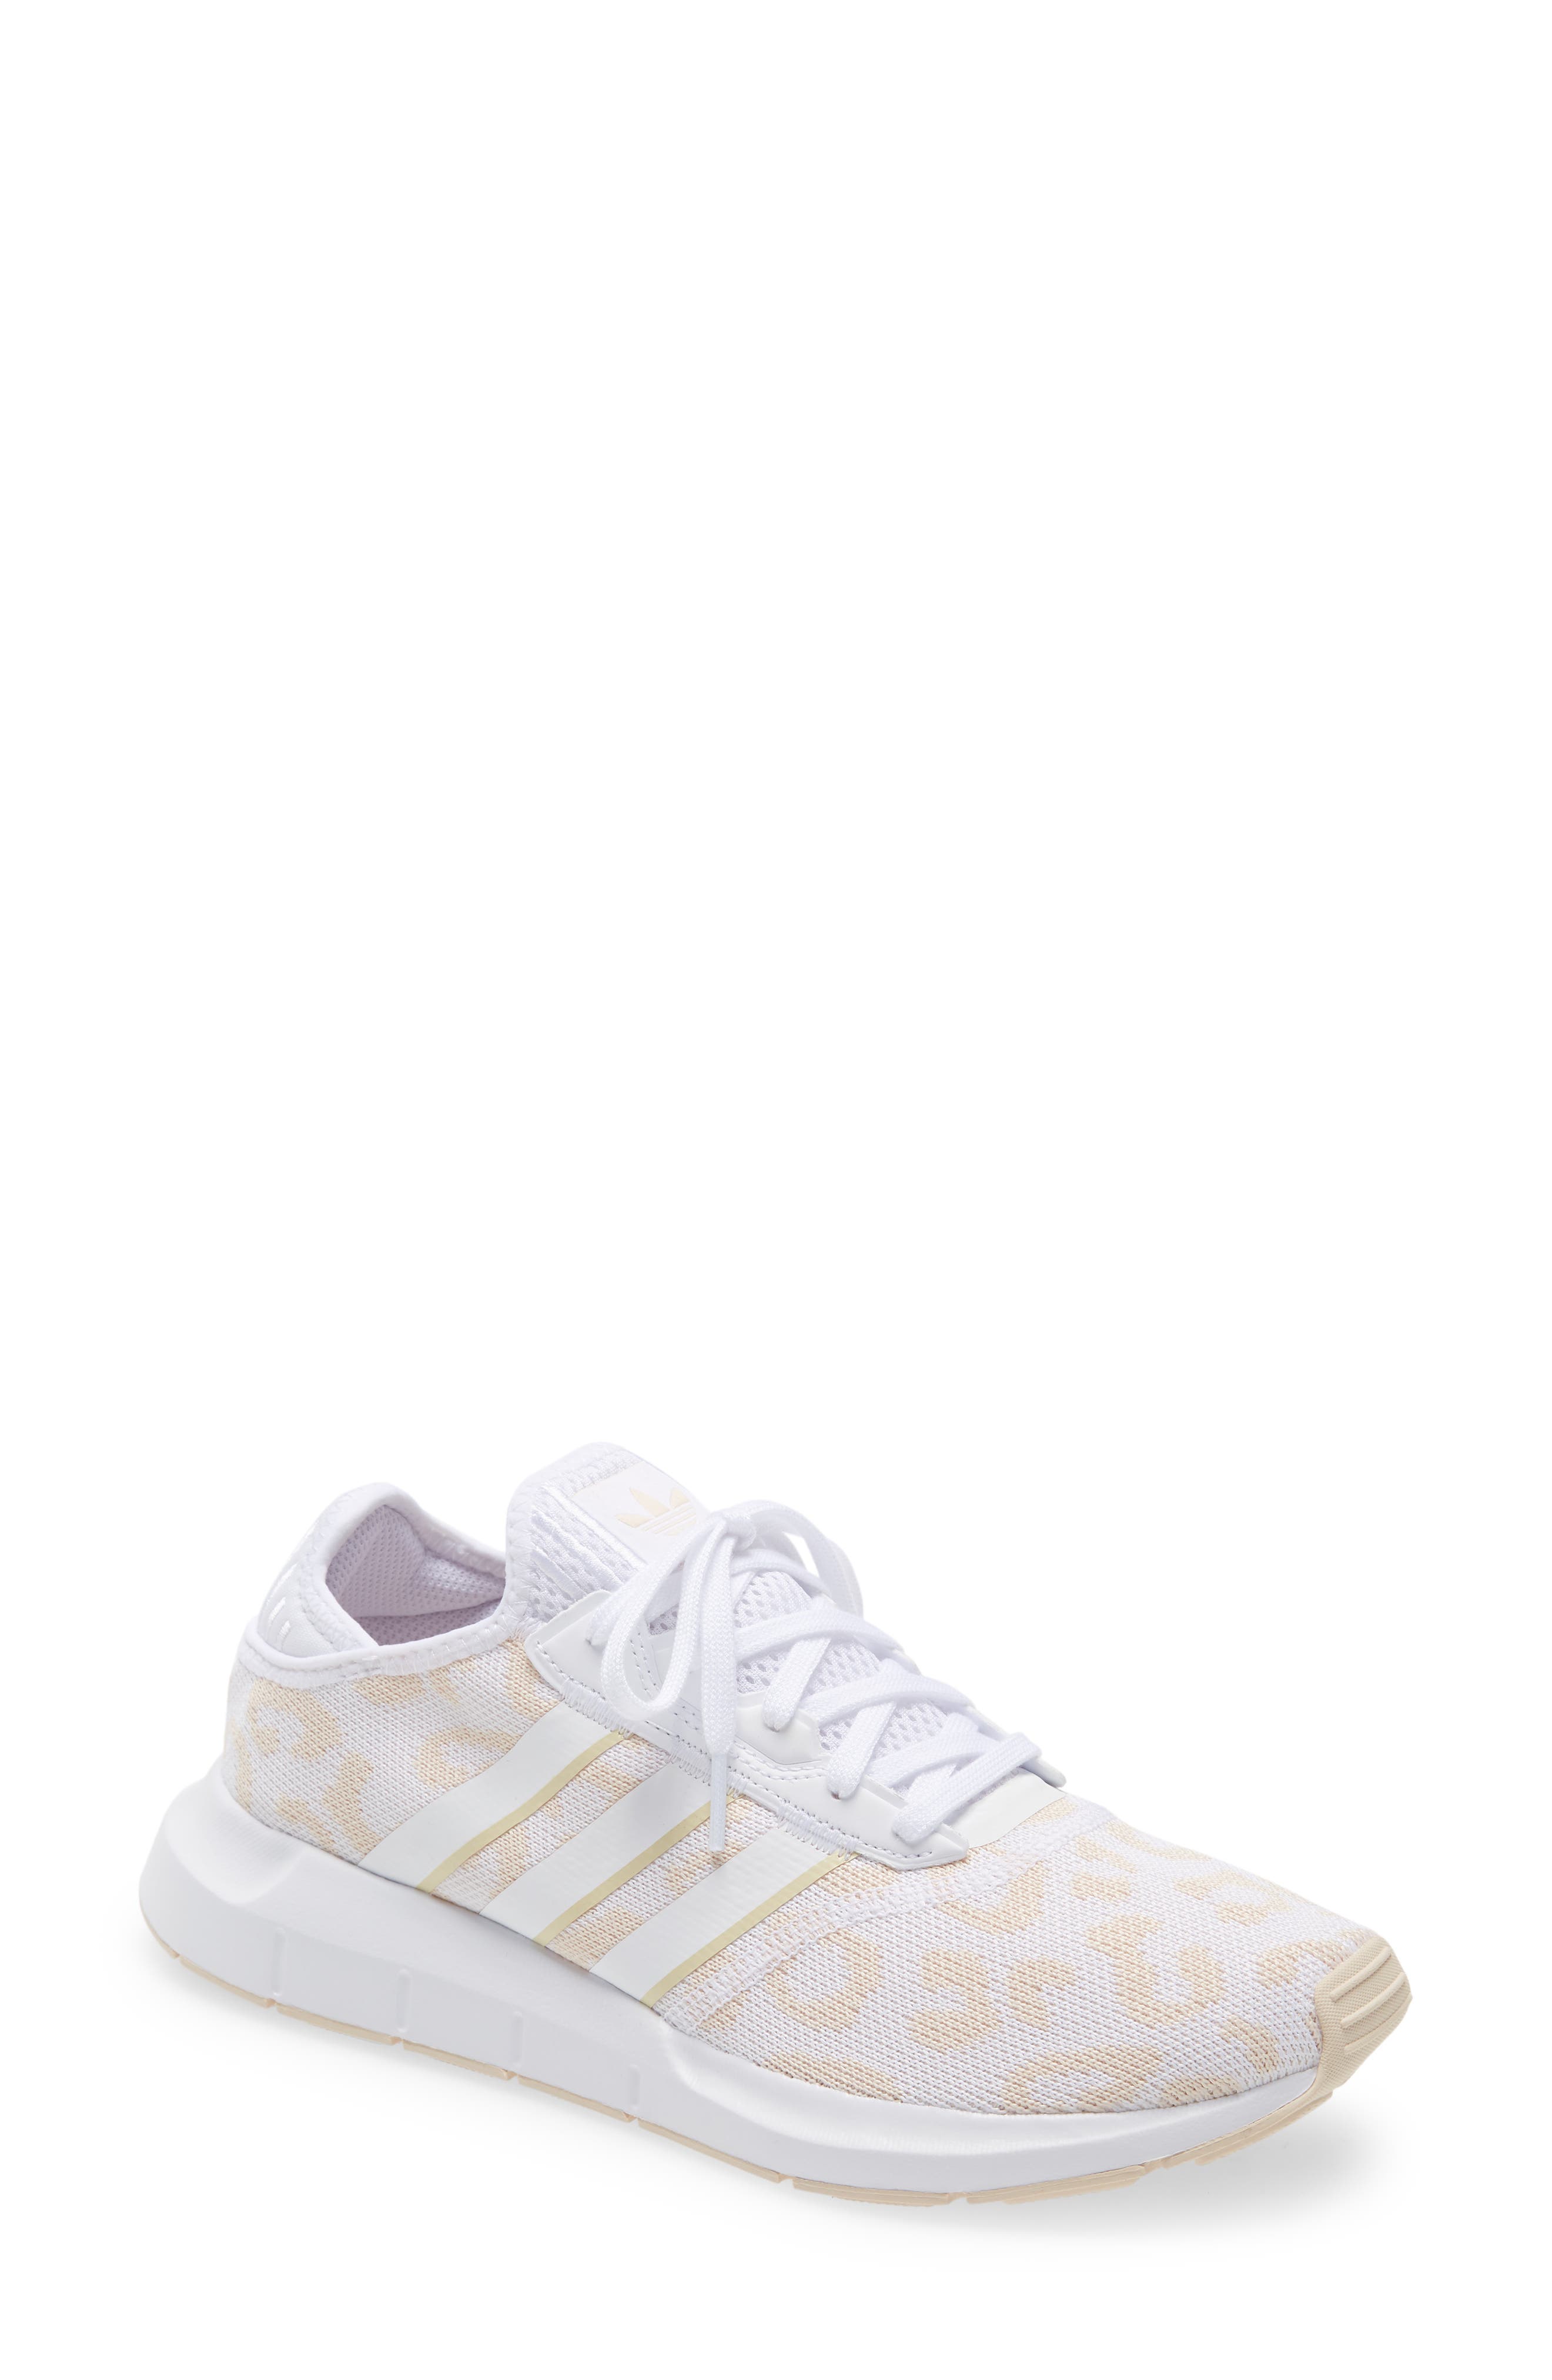 UPC 194811083007 product image for adidas Swift Run X Sneaker, Size 7.5 in Halo Ivory/White at Nordstrom | upcitemdb.com